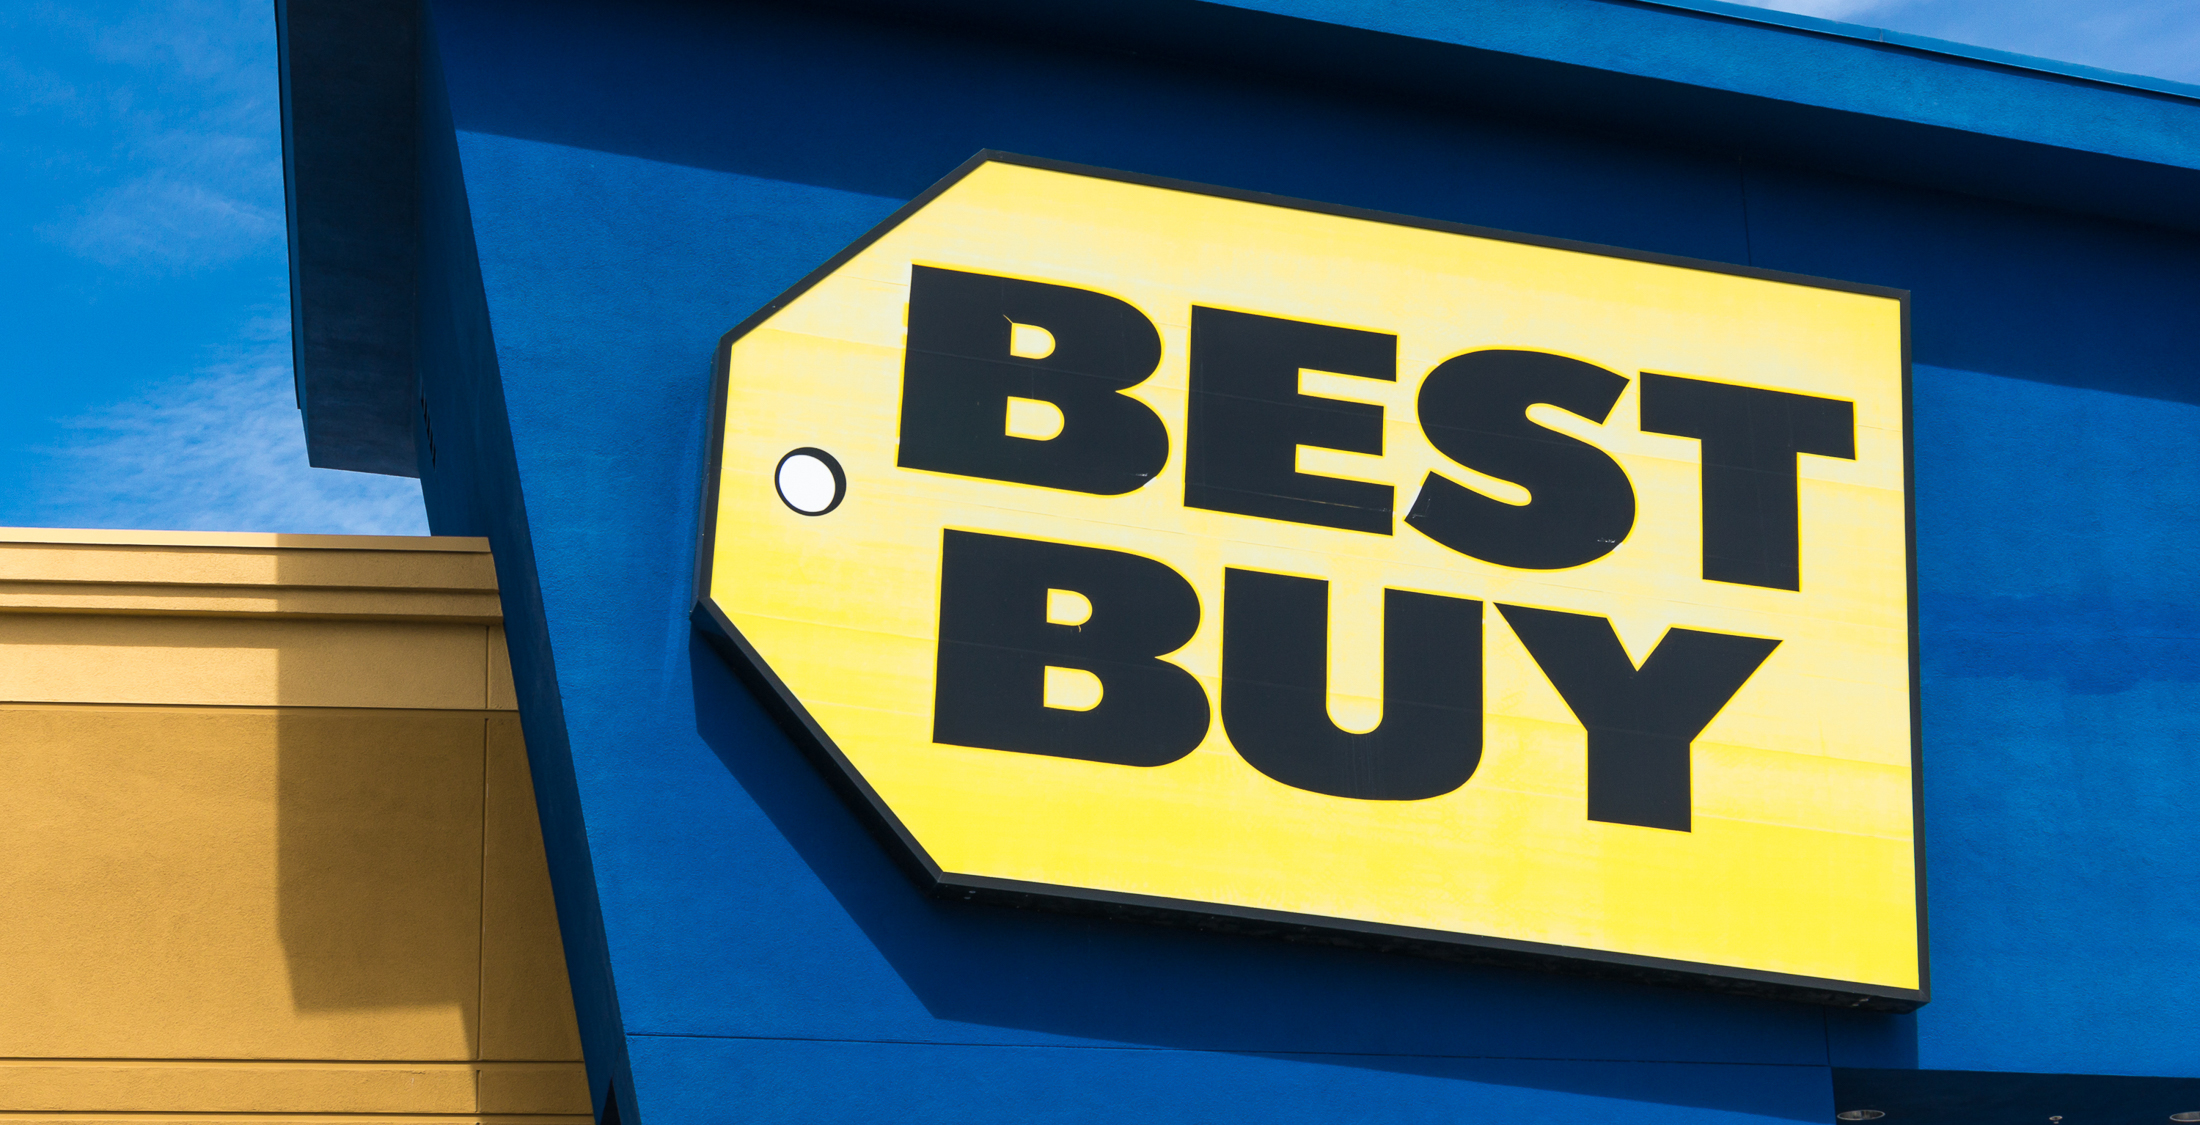 13 Best Ways To Save at Best Buy Every Time You Shop